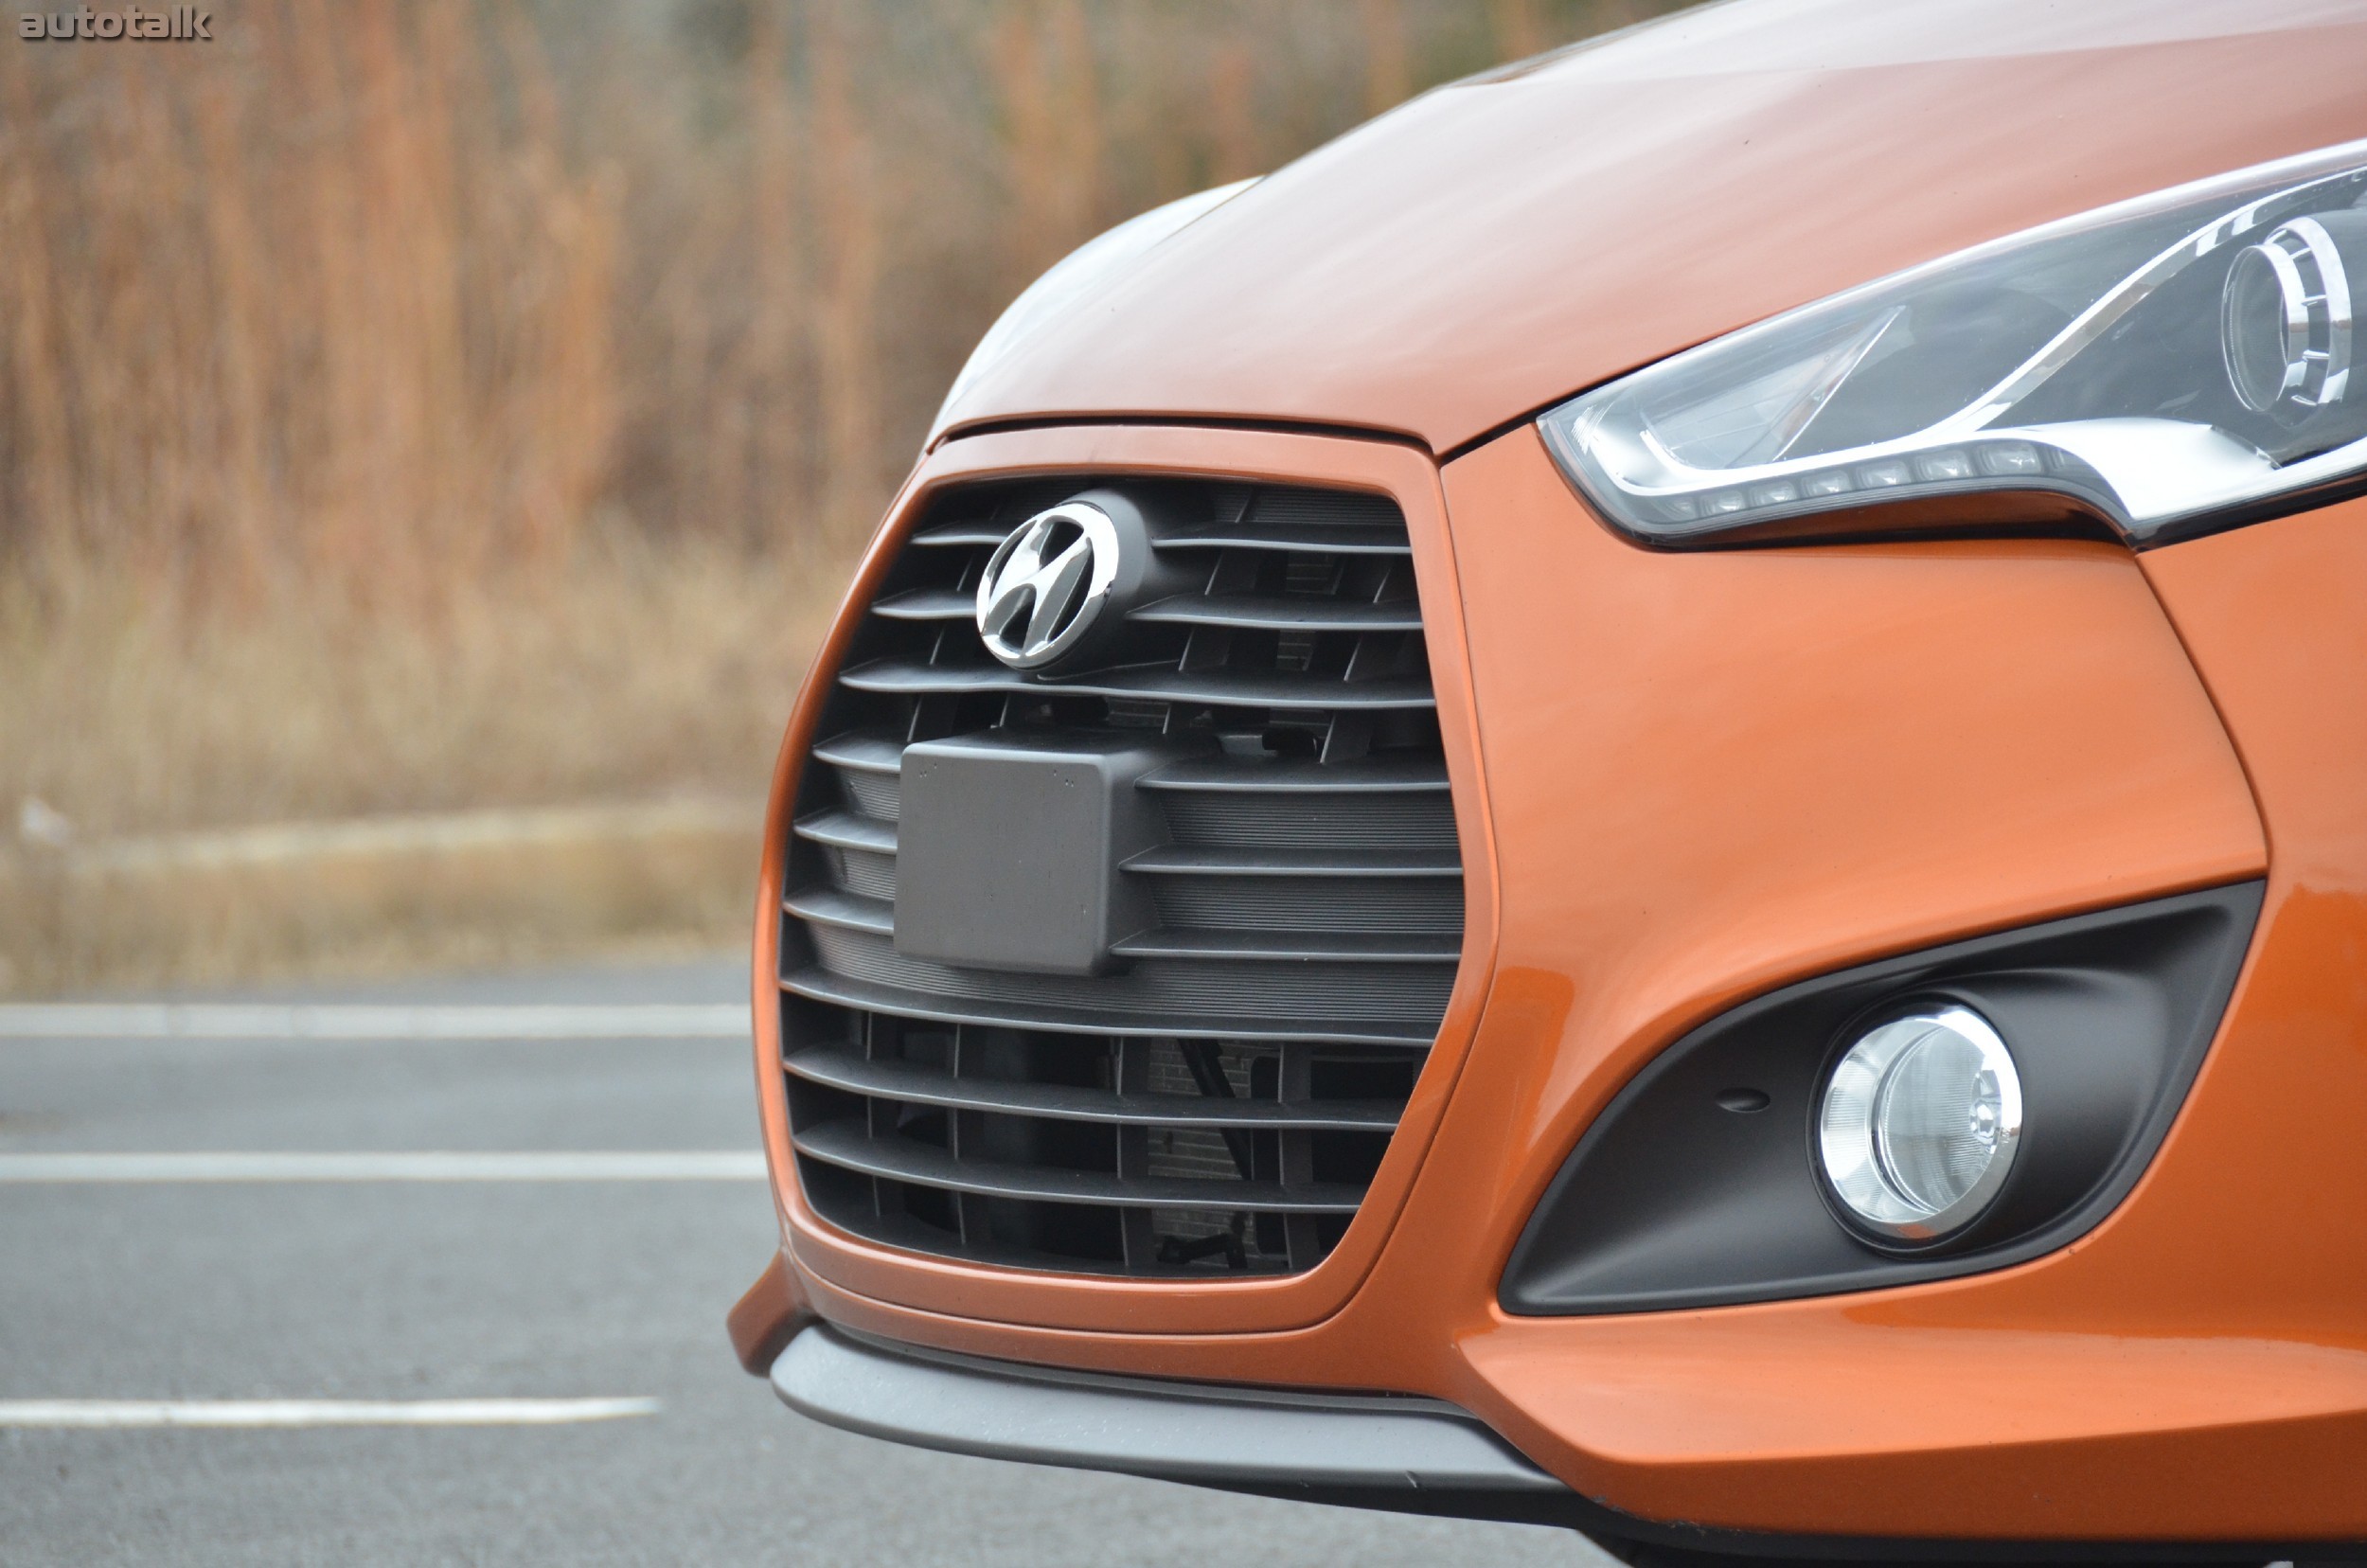 2013 Hyundai Veloster Review